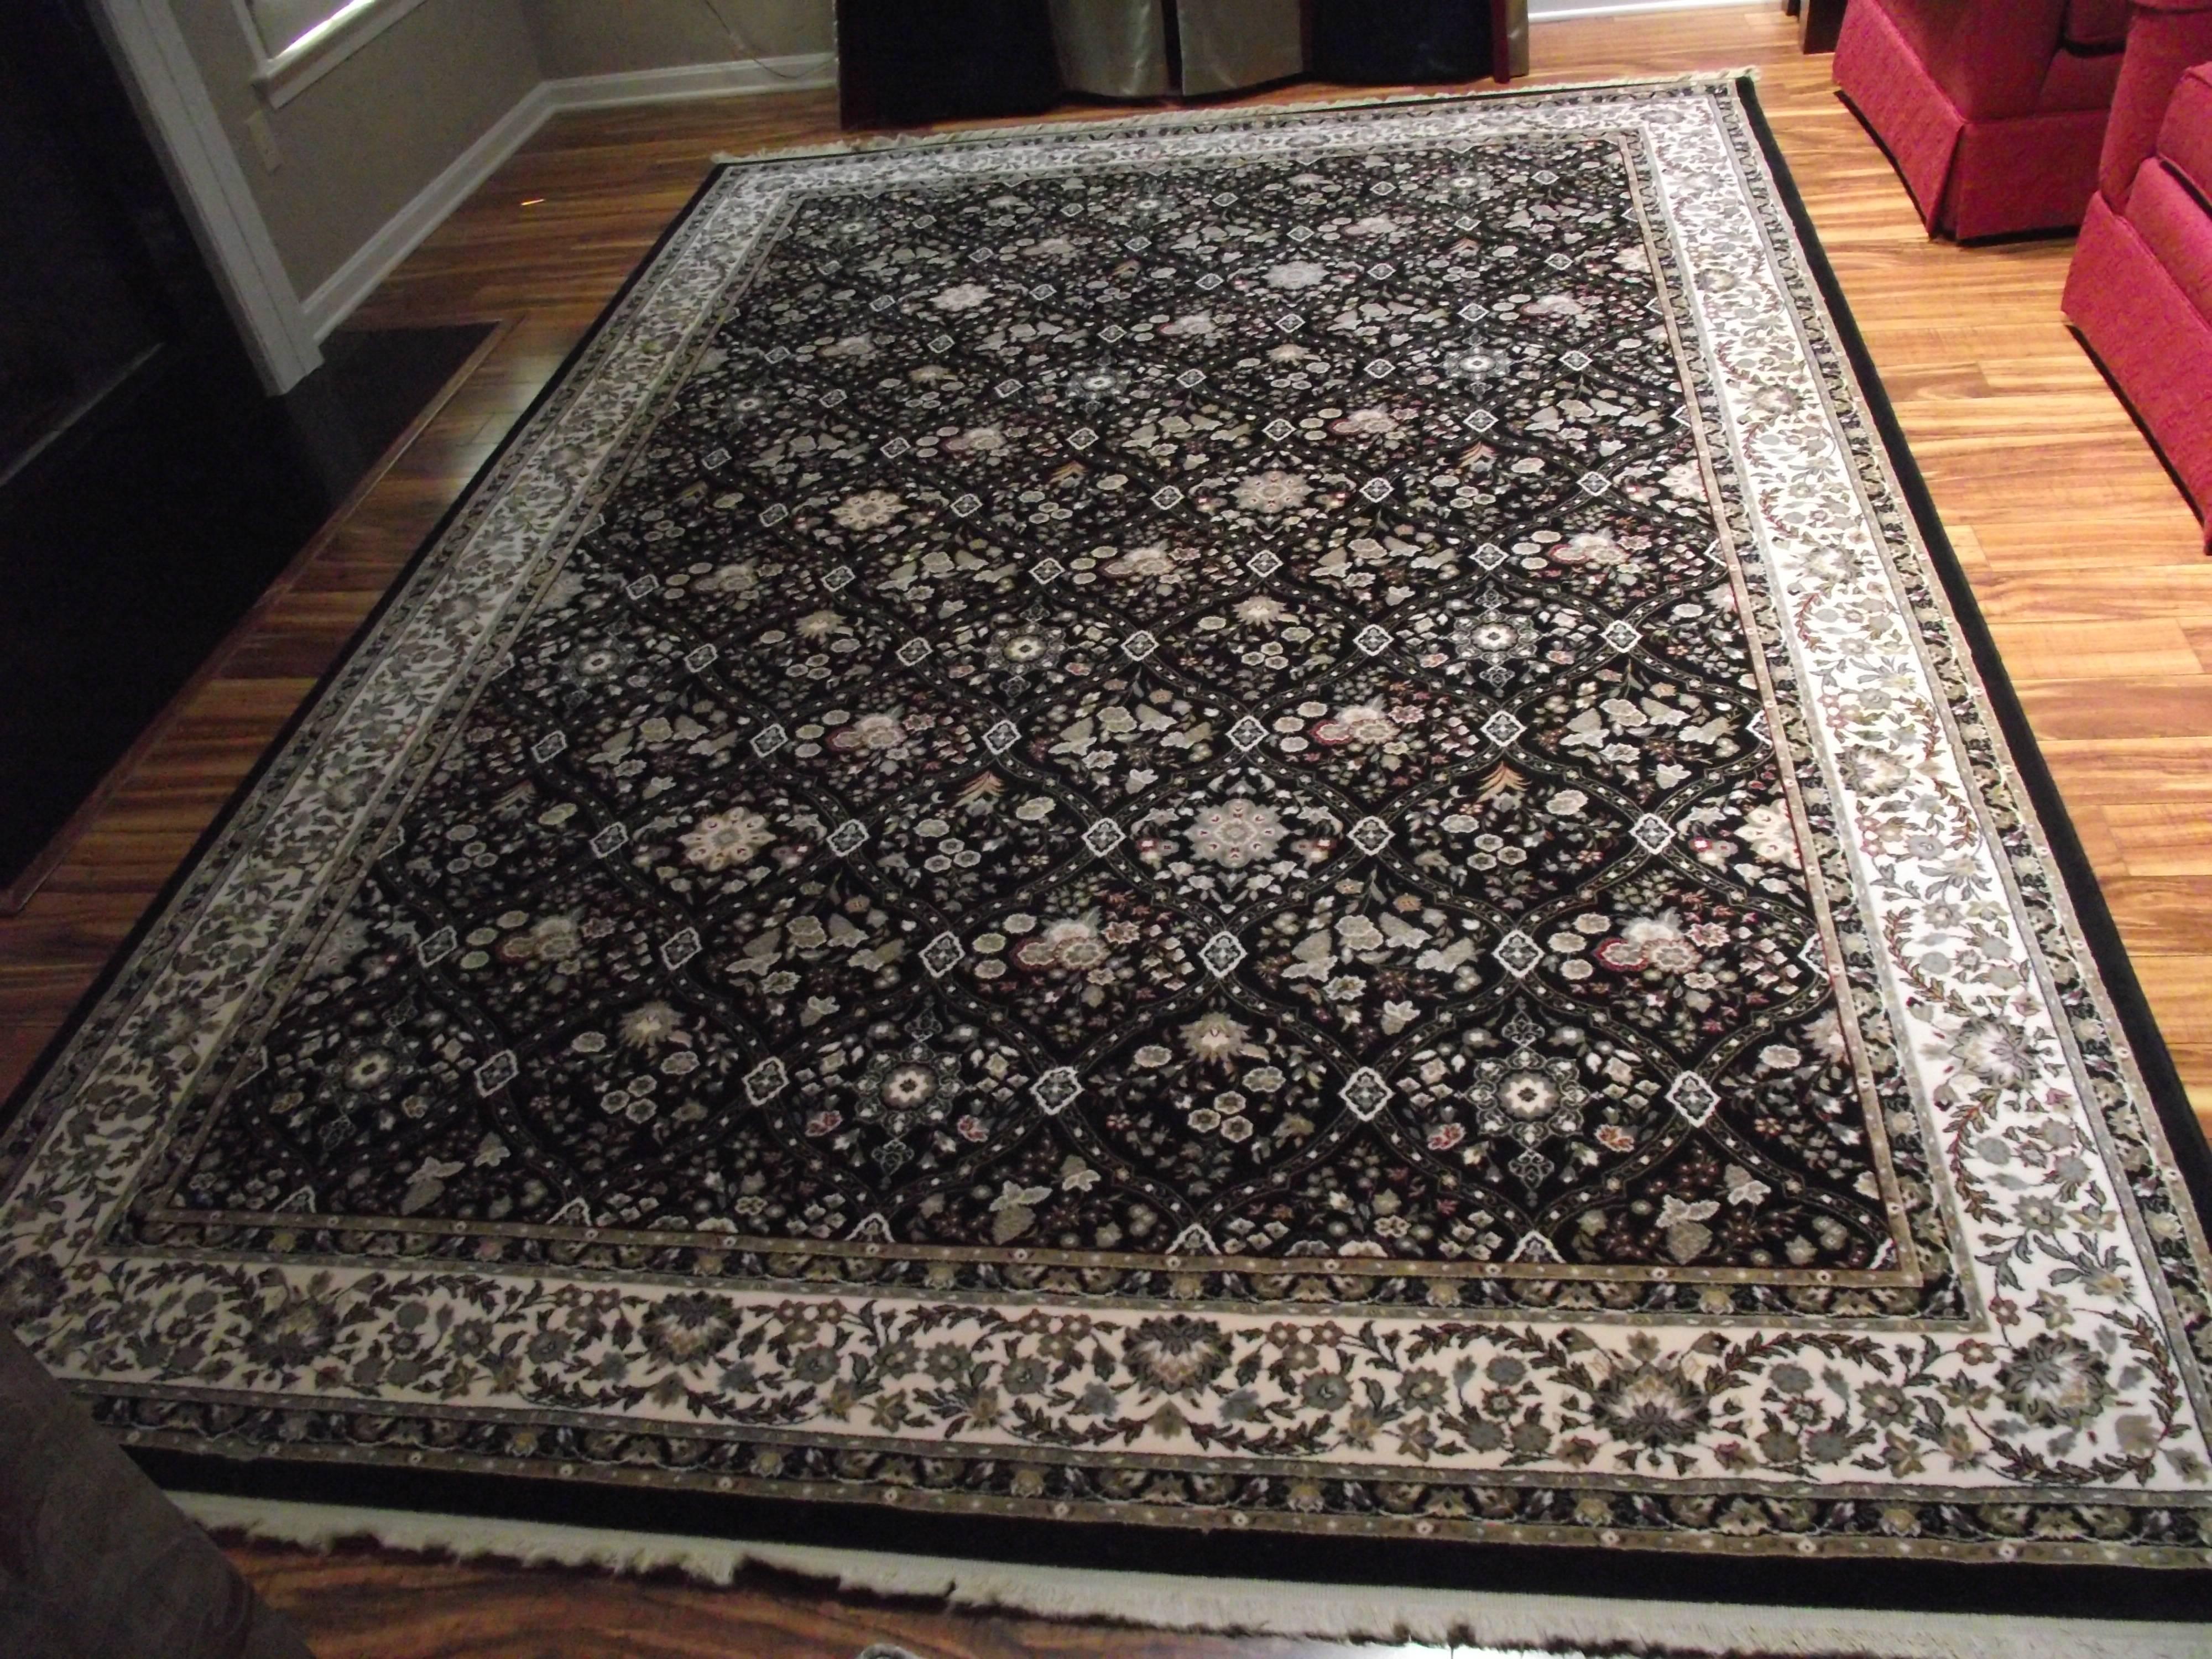 This beautiful Belgium rug has a black background with decorative detail in beige, white, grey and red.

It has no stains and shows no signs of wear.